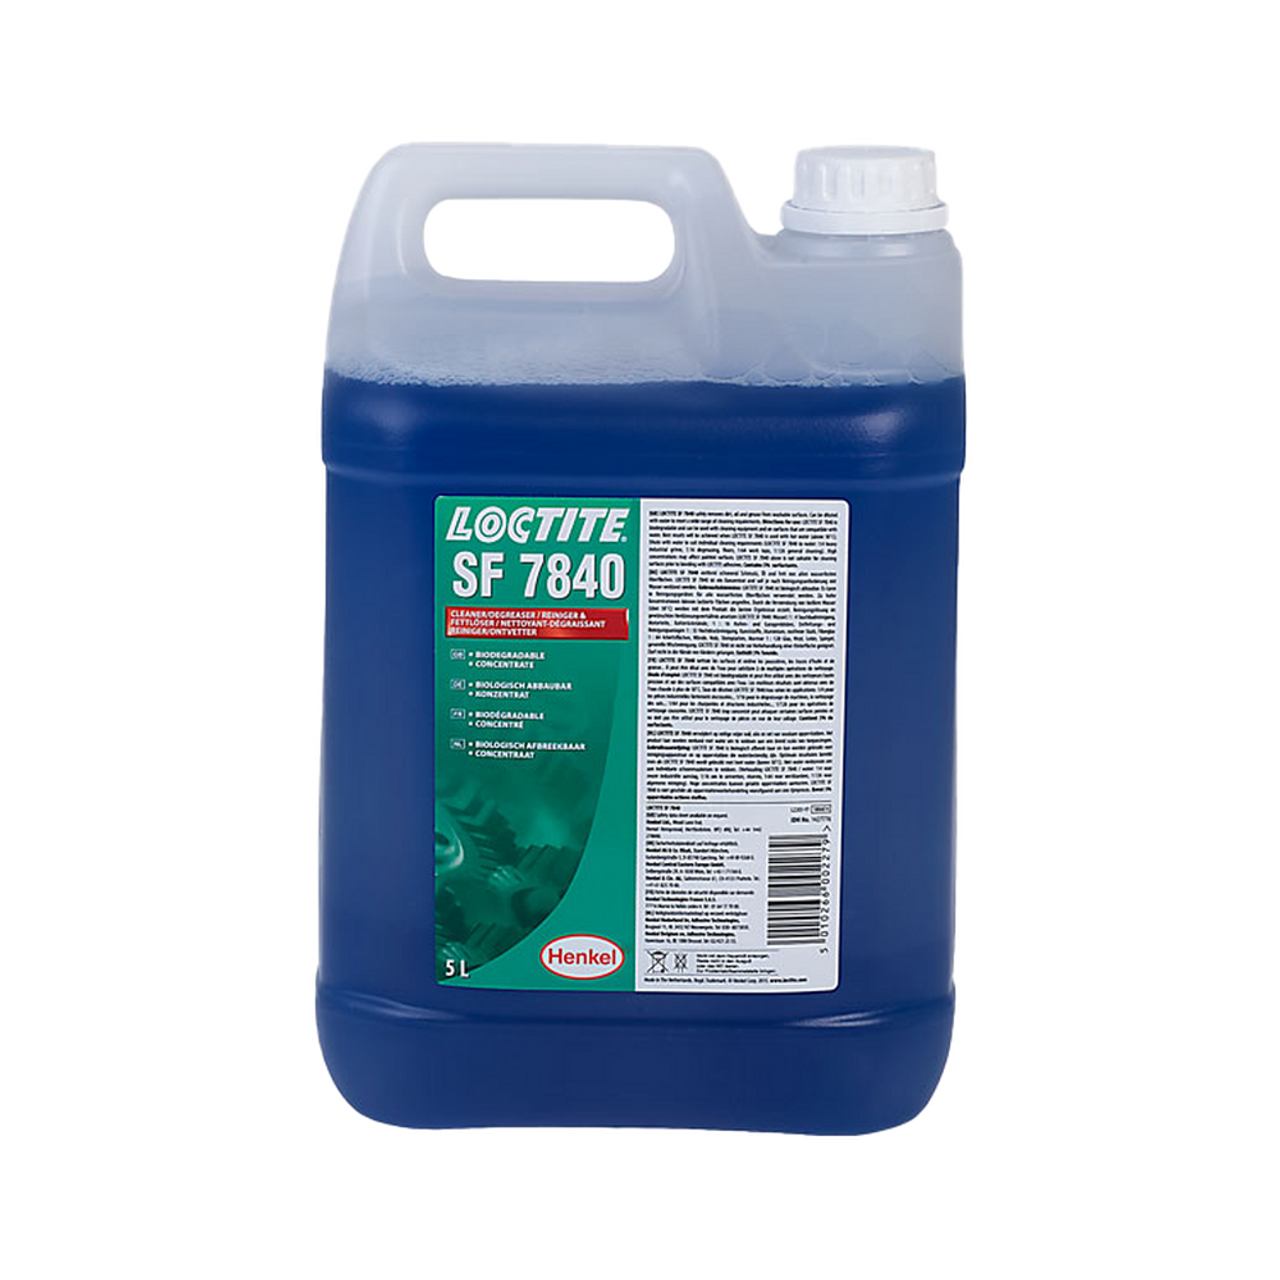 Loctite 2046047 Cleaner/Degreaser, Cherry, 1 gal, Jug